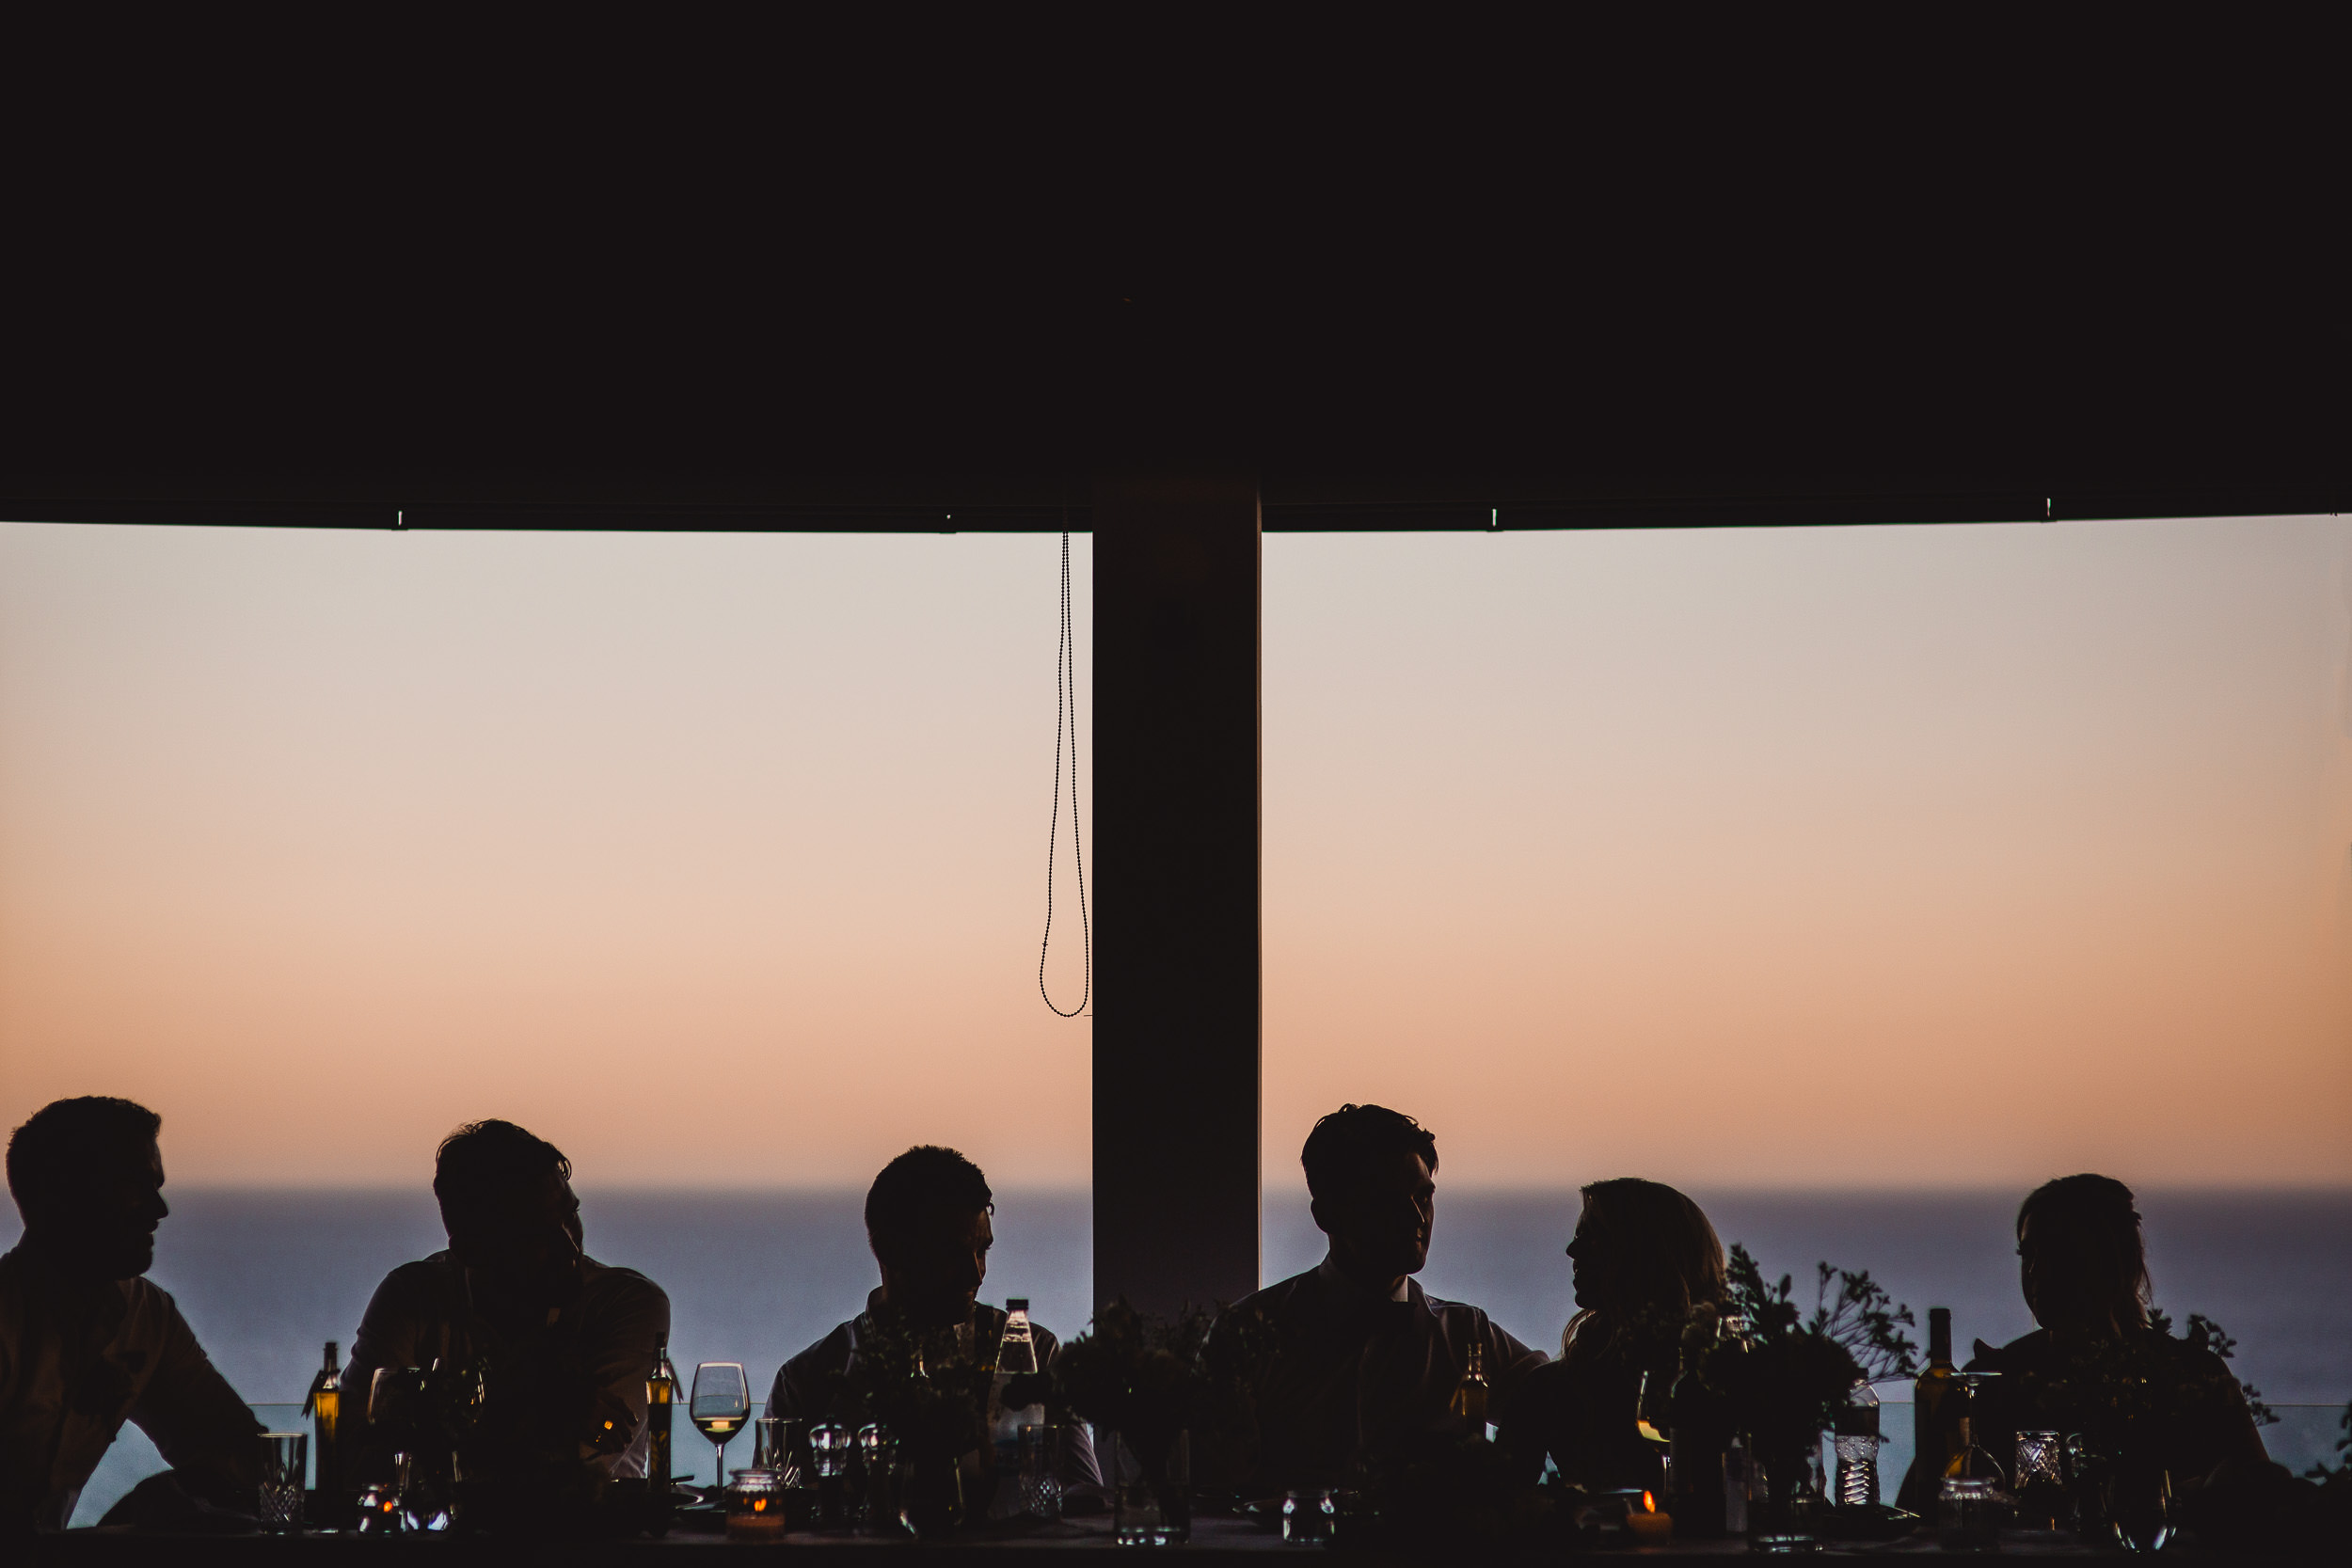 A bride and her wedding party seated at a table with a view of the ocean.